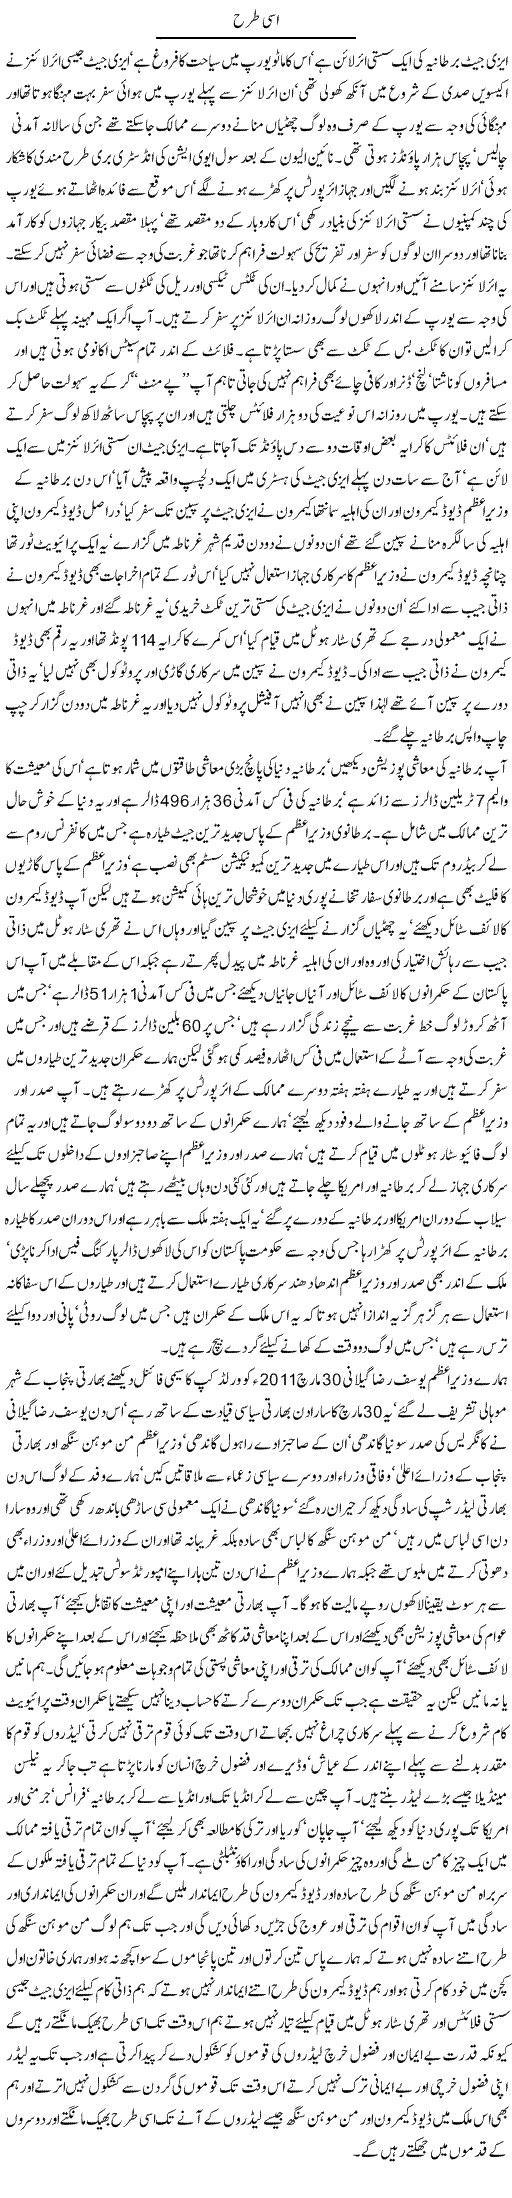 Life Style of British PM Express Column Javed Chaudhry 11 April 2011